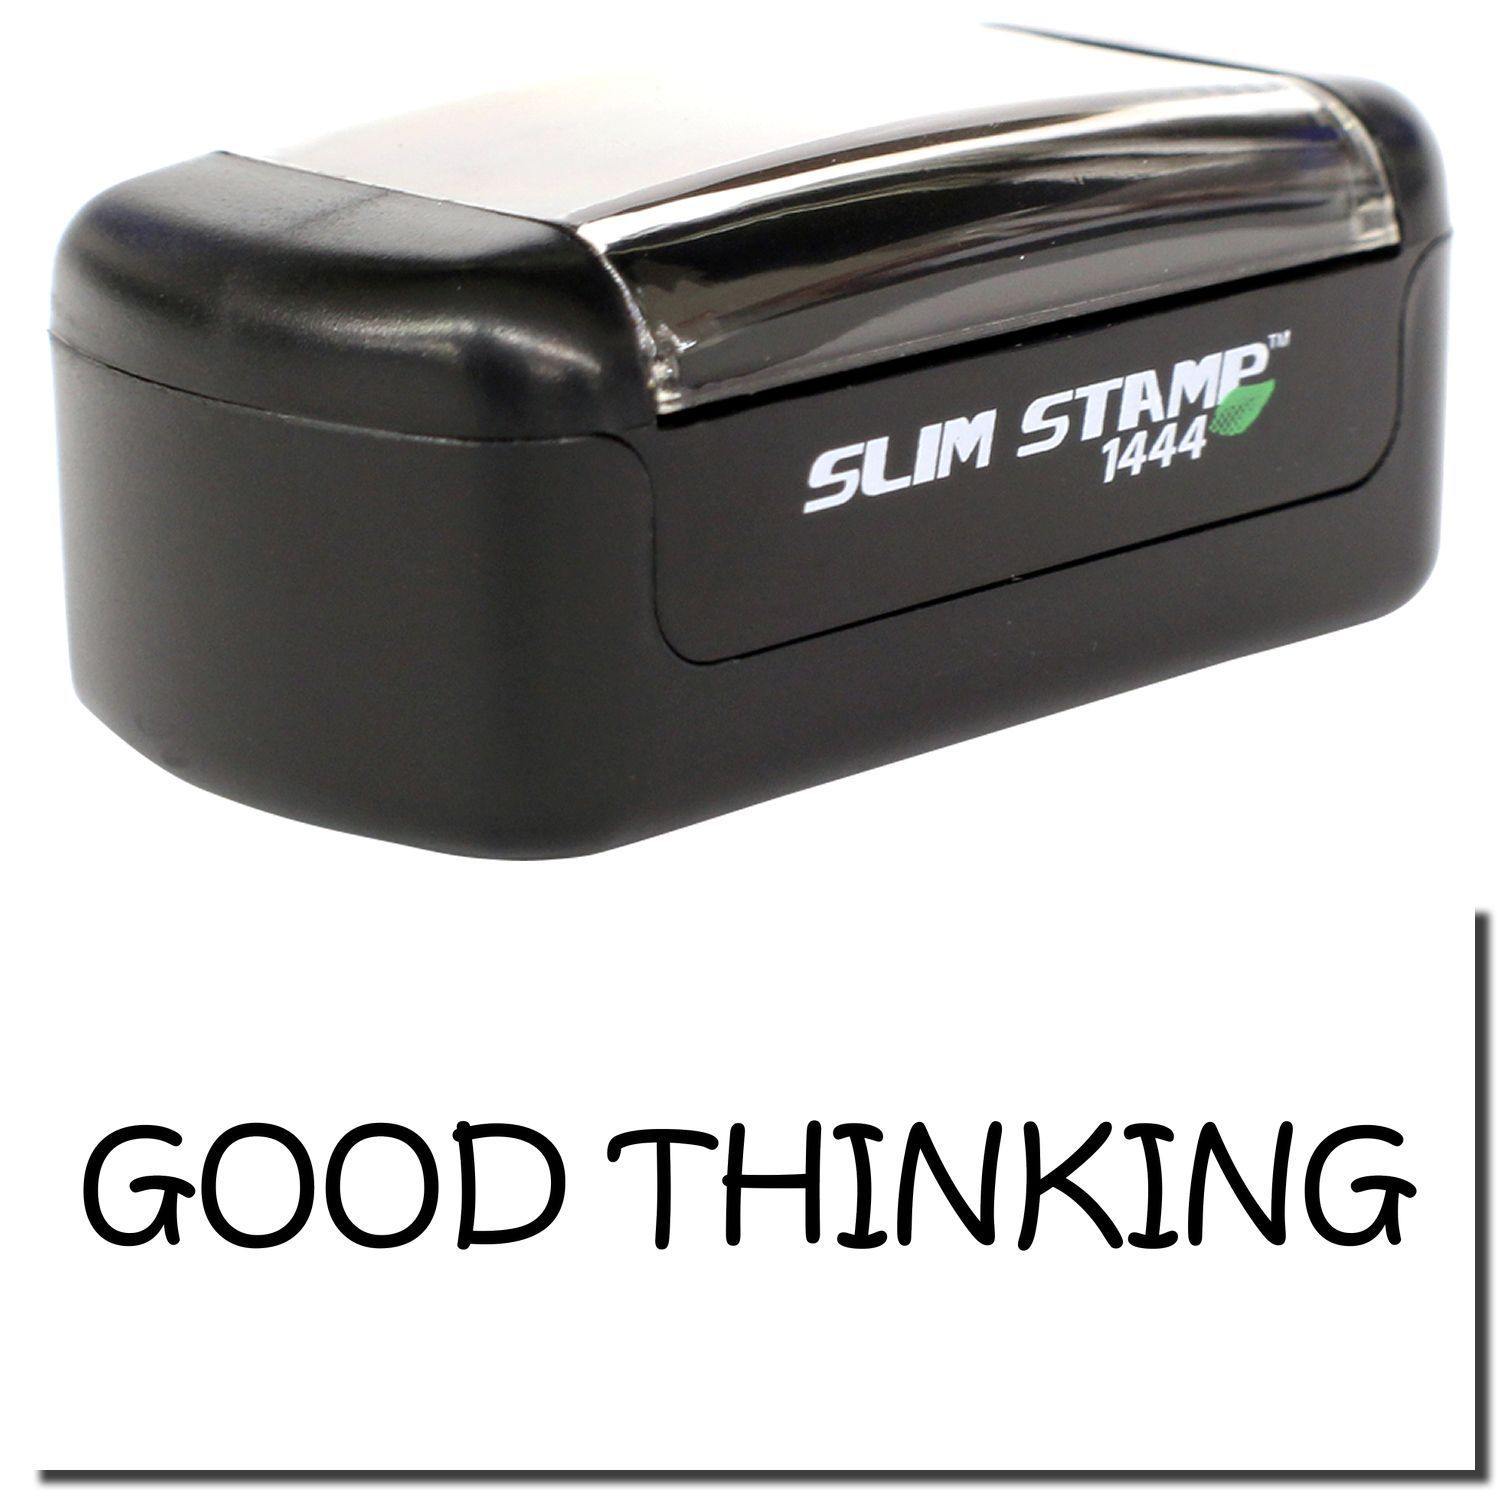 A stock office pre-inked stamp with a stamped image showing how the text "GOOD THINKING" is displayed after stamping.